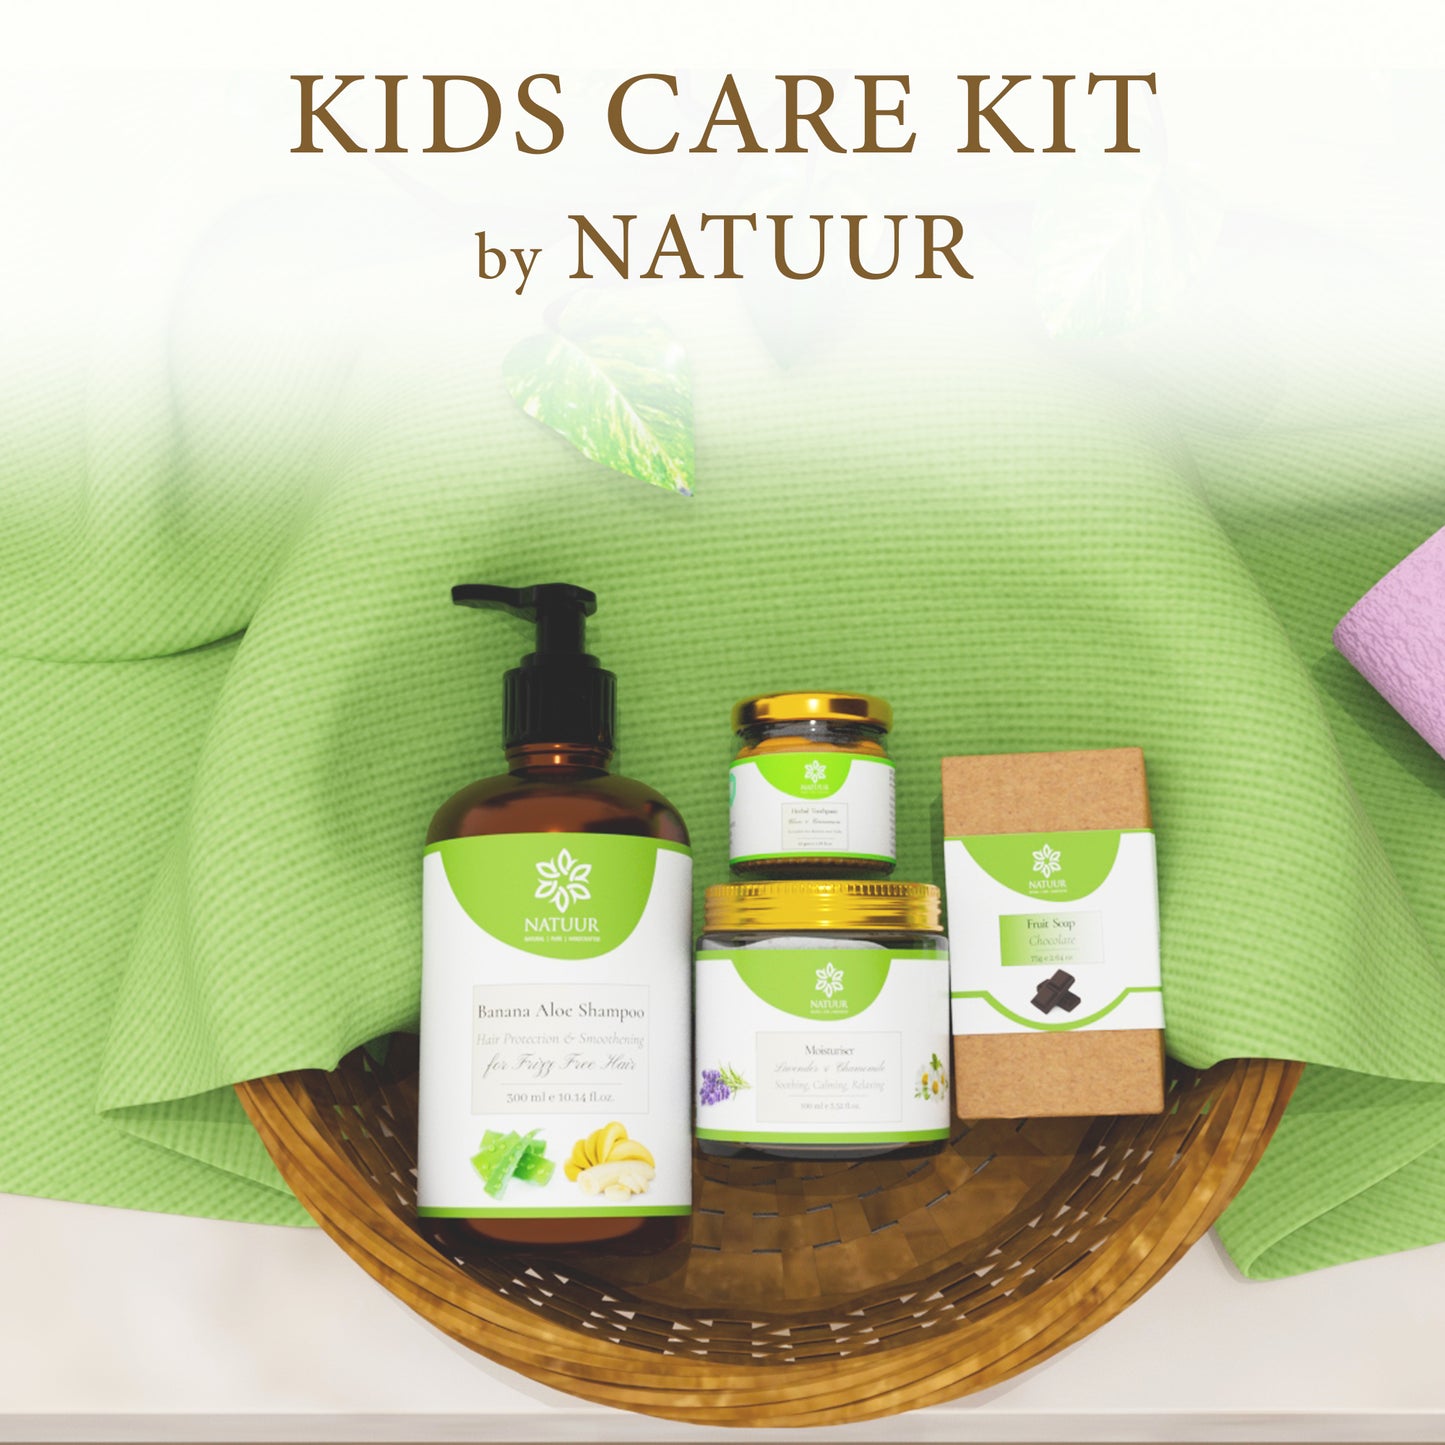 Kit For Kid's Care